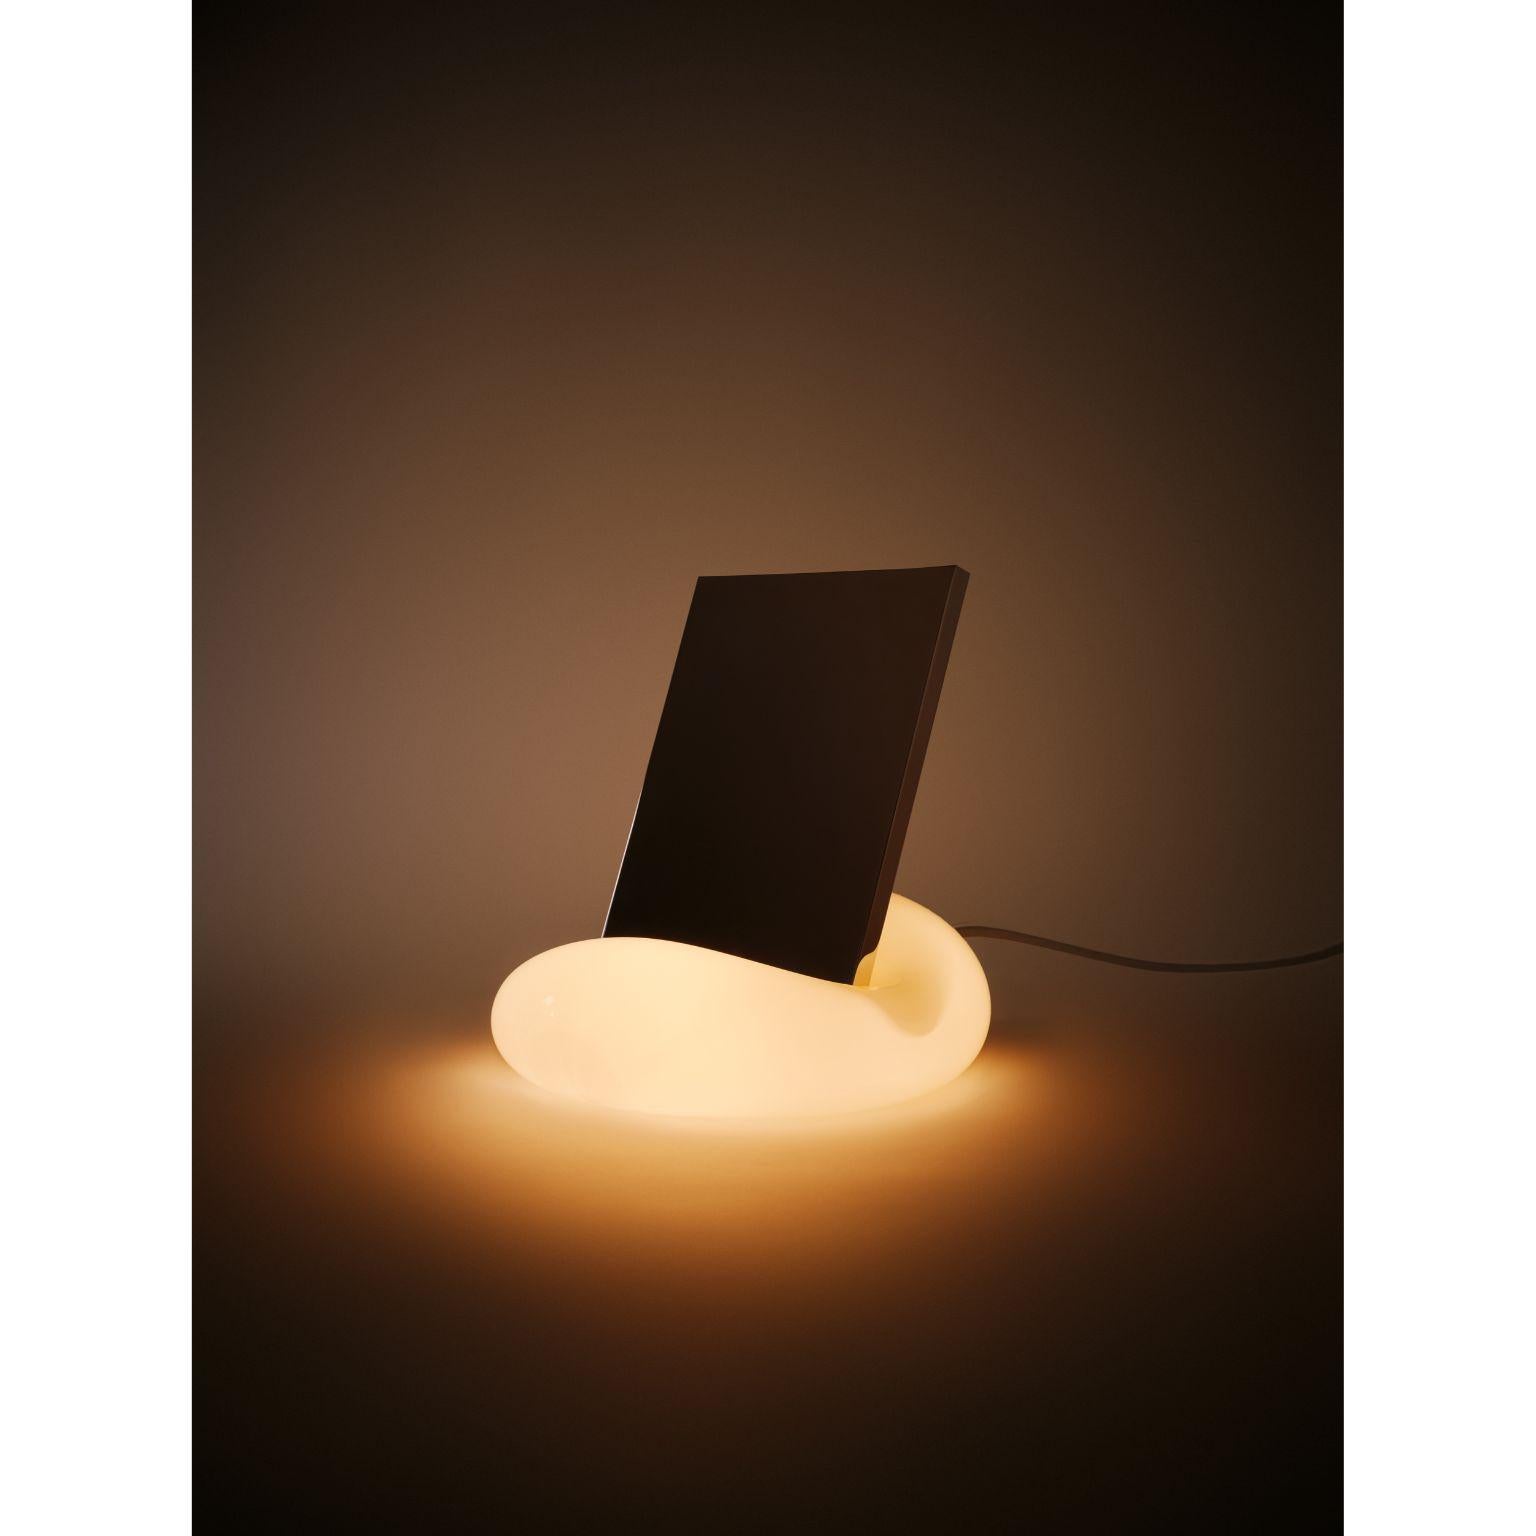 Pillow mirror lamp by Nick Pourfard
Dimensions: Ø 25.5 x H 35.5 cm.
Materials: metal, hand-blown glass.
Different finishes available.

All our lamps can be wired according to each country. If sold to the USA it will be wired for the USA for